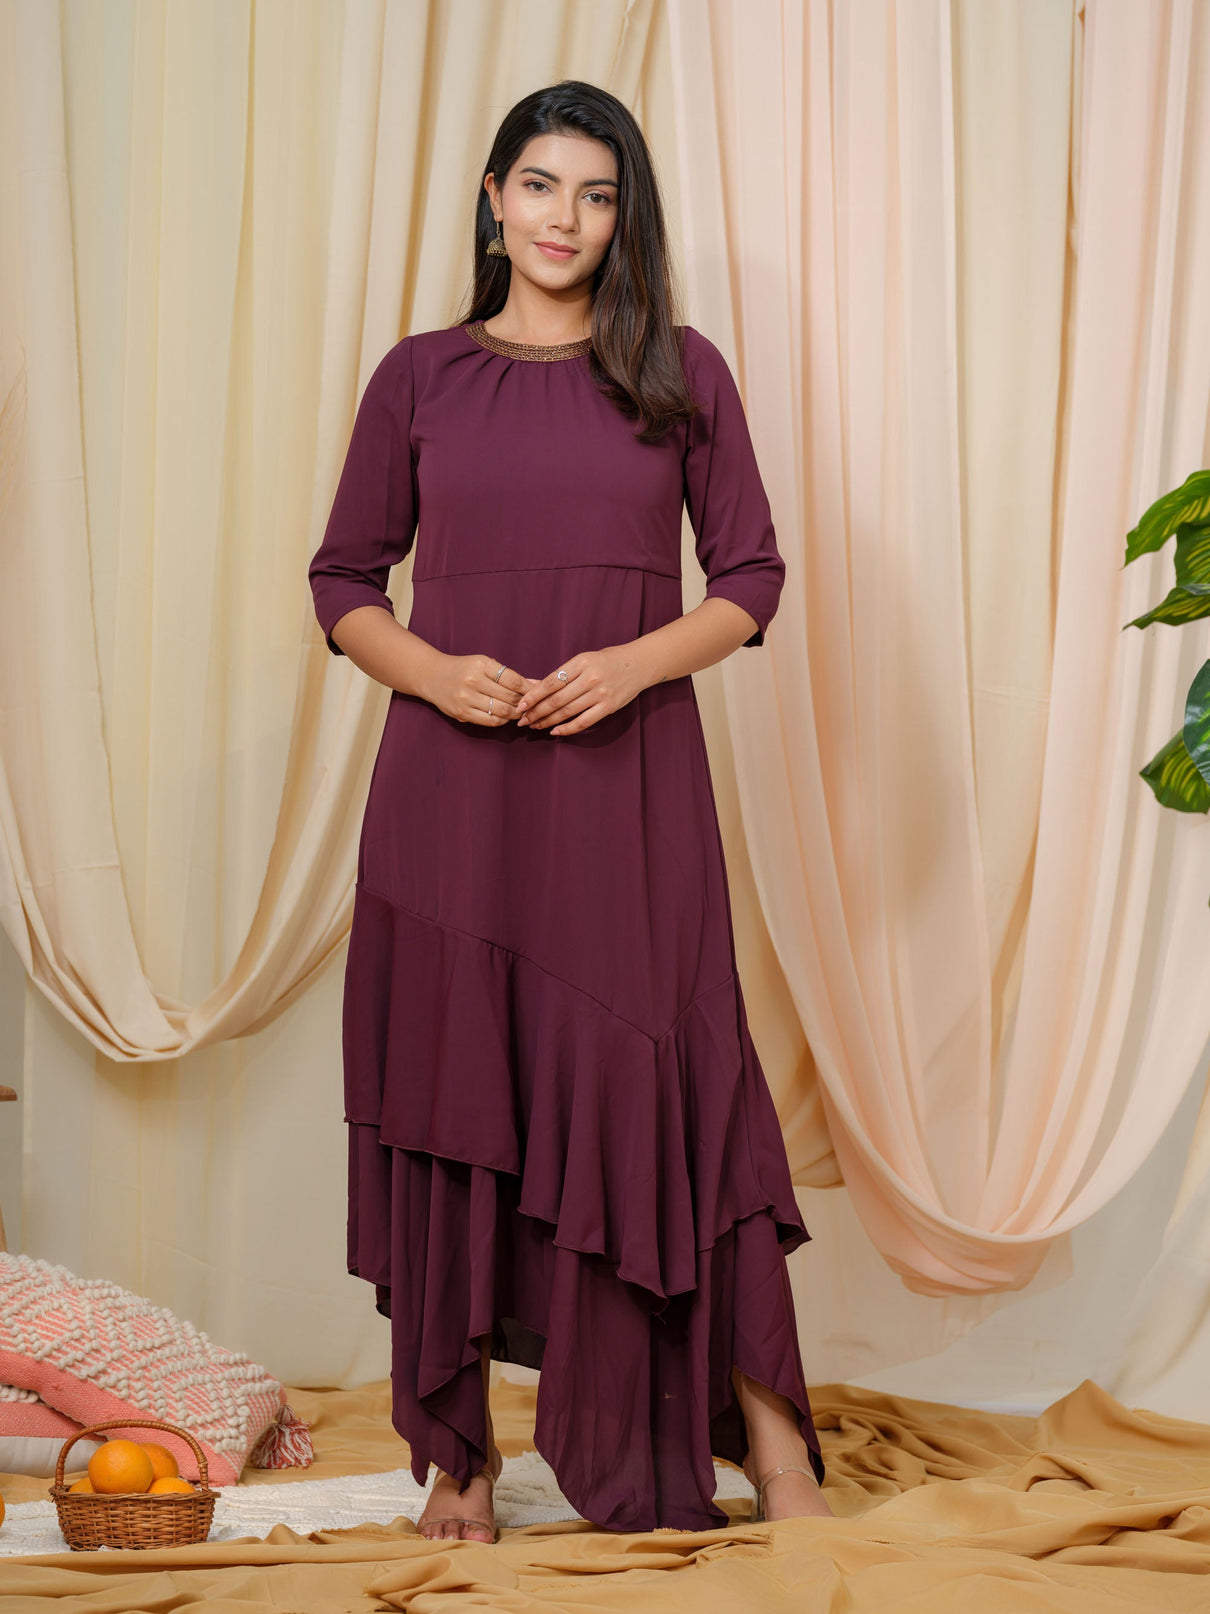 Solid colored dress highlighted with handcrafted embroidery Etiquette Apparel